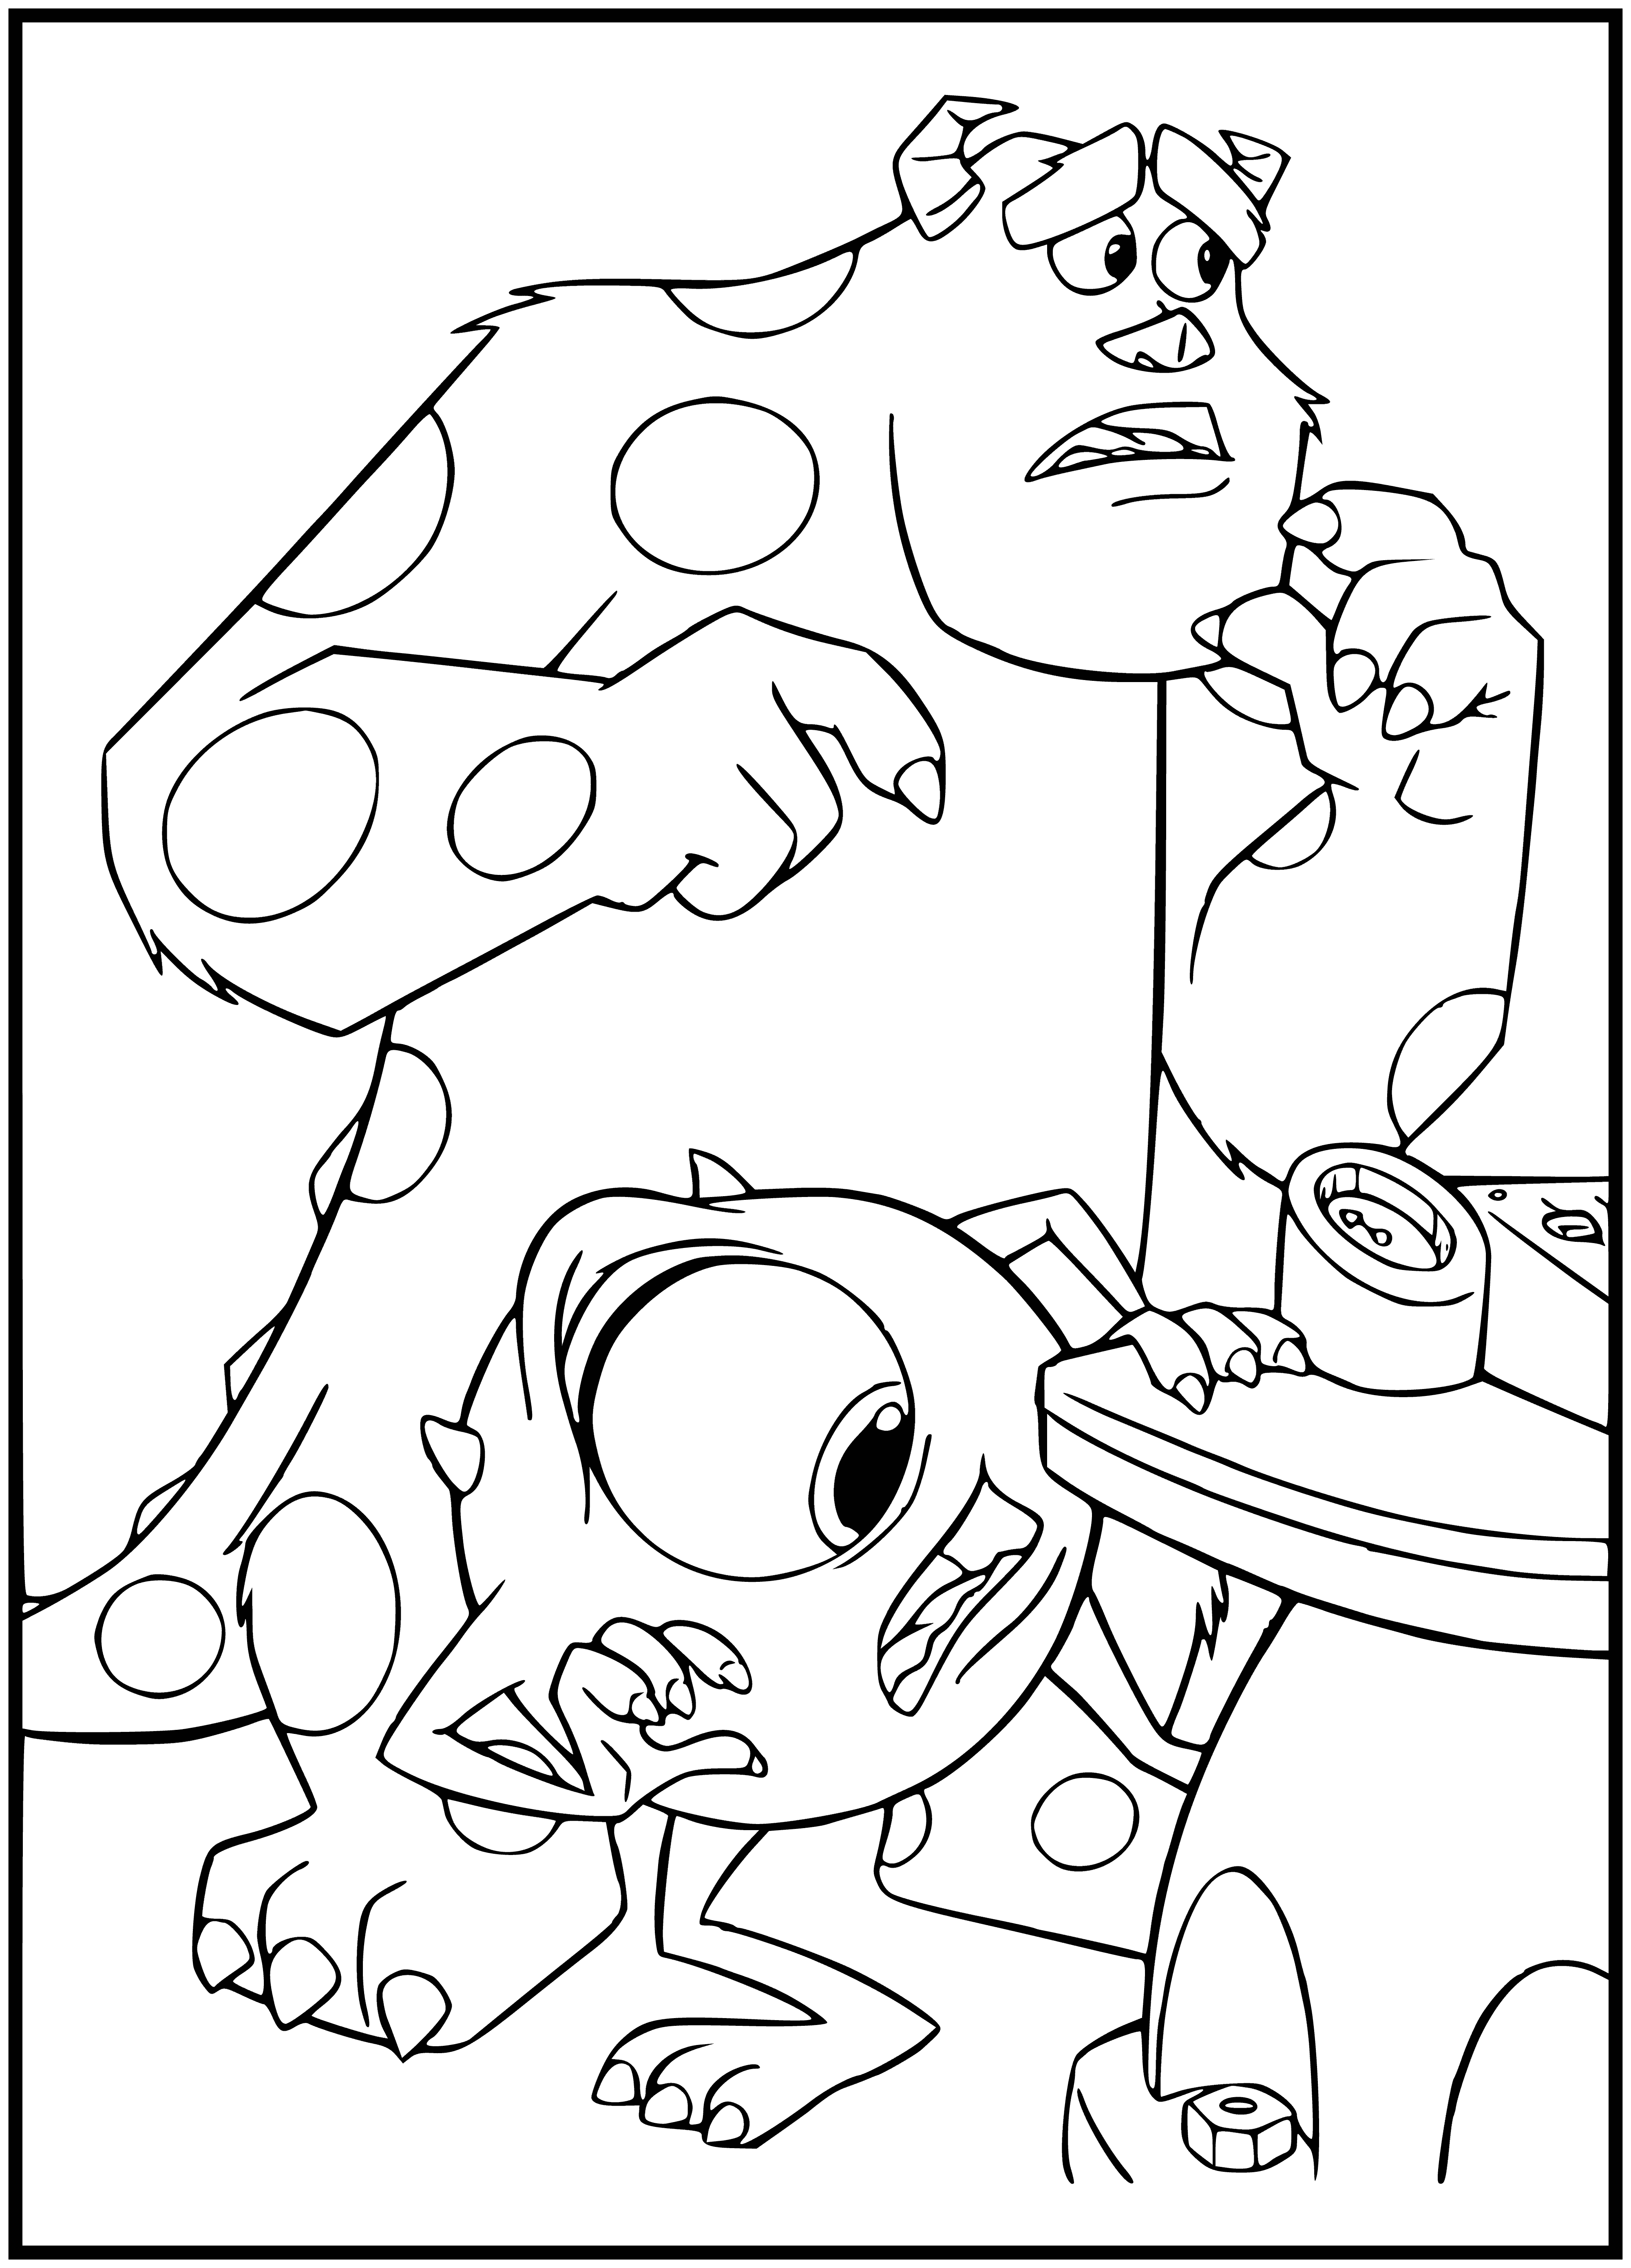 coloring page: Monster hunting through a pile of papers; holding a flashlight, intense concentration visible. #MonsterFun